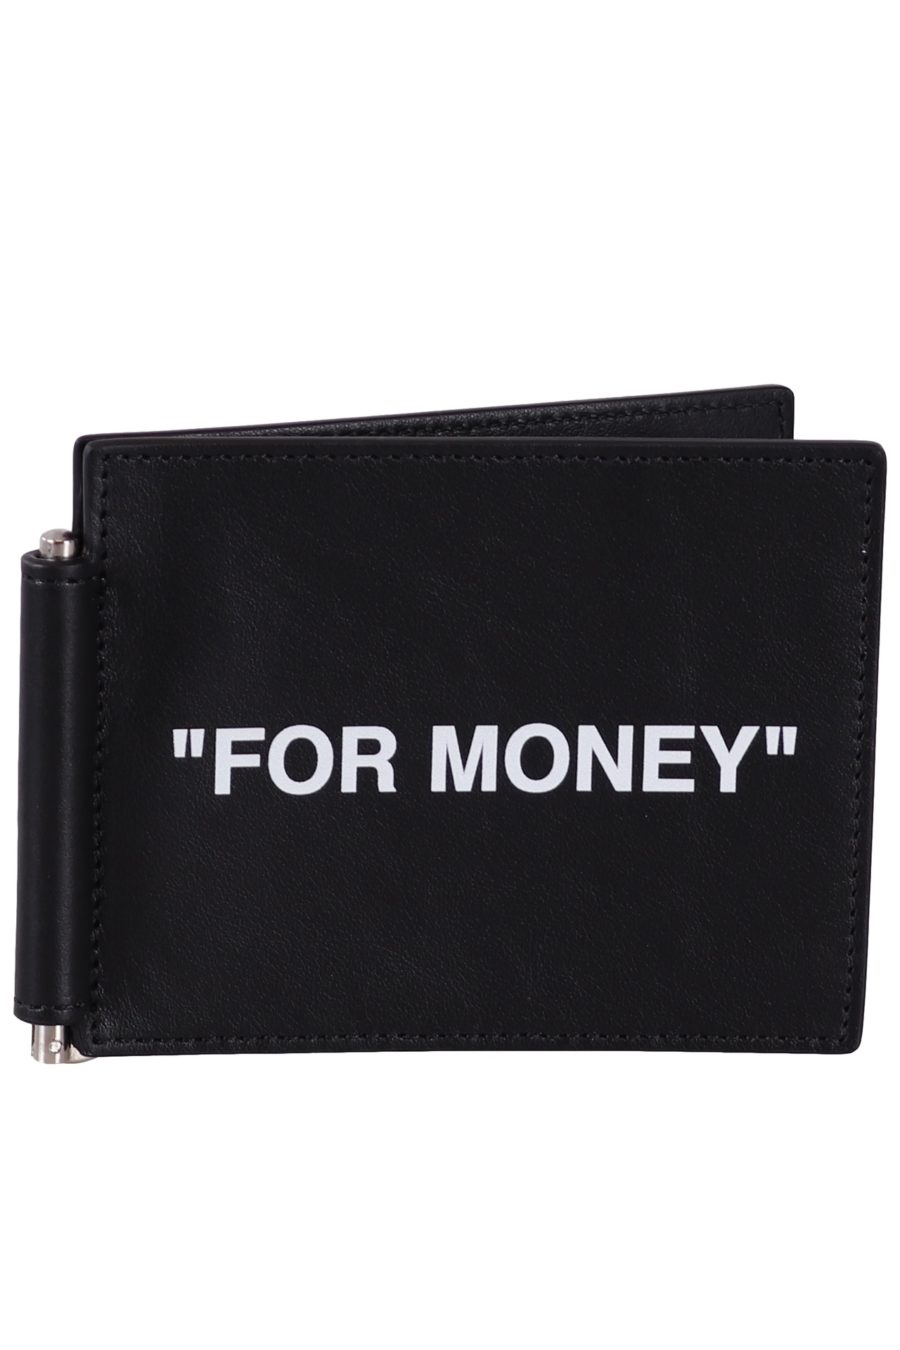 Off-White black wallet with clip - 8a31100f0a39a9f22ac0b953cdecb50421aea29f